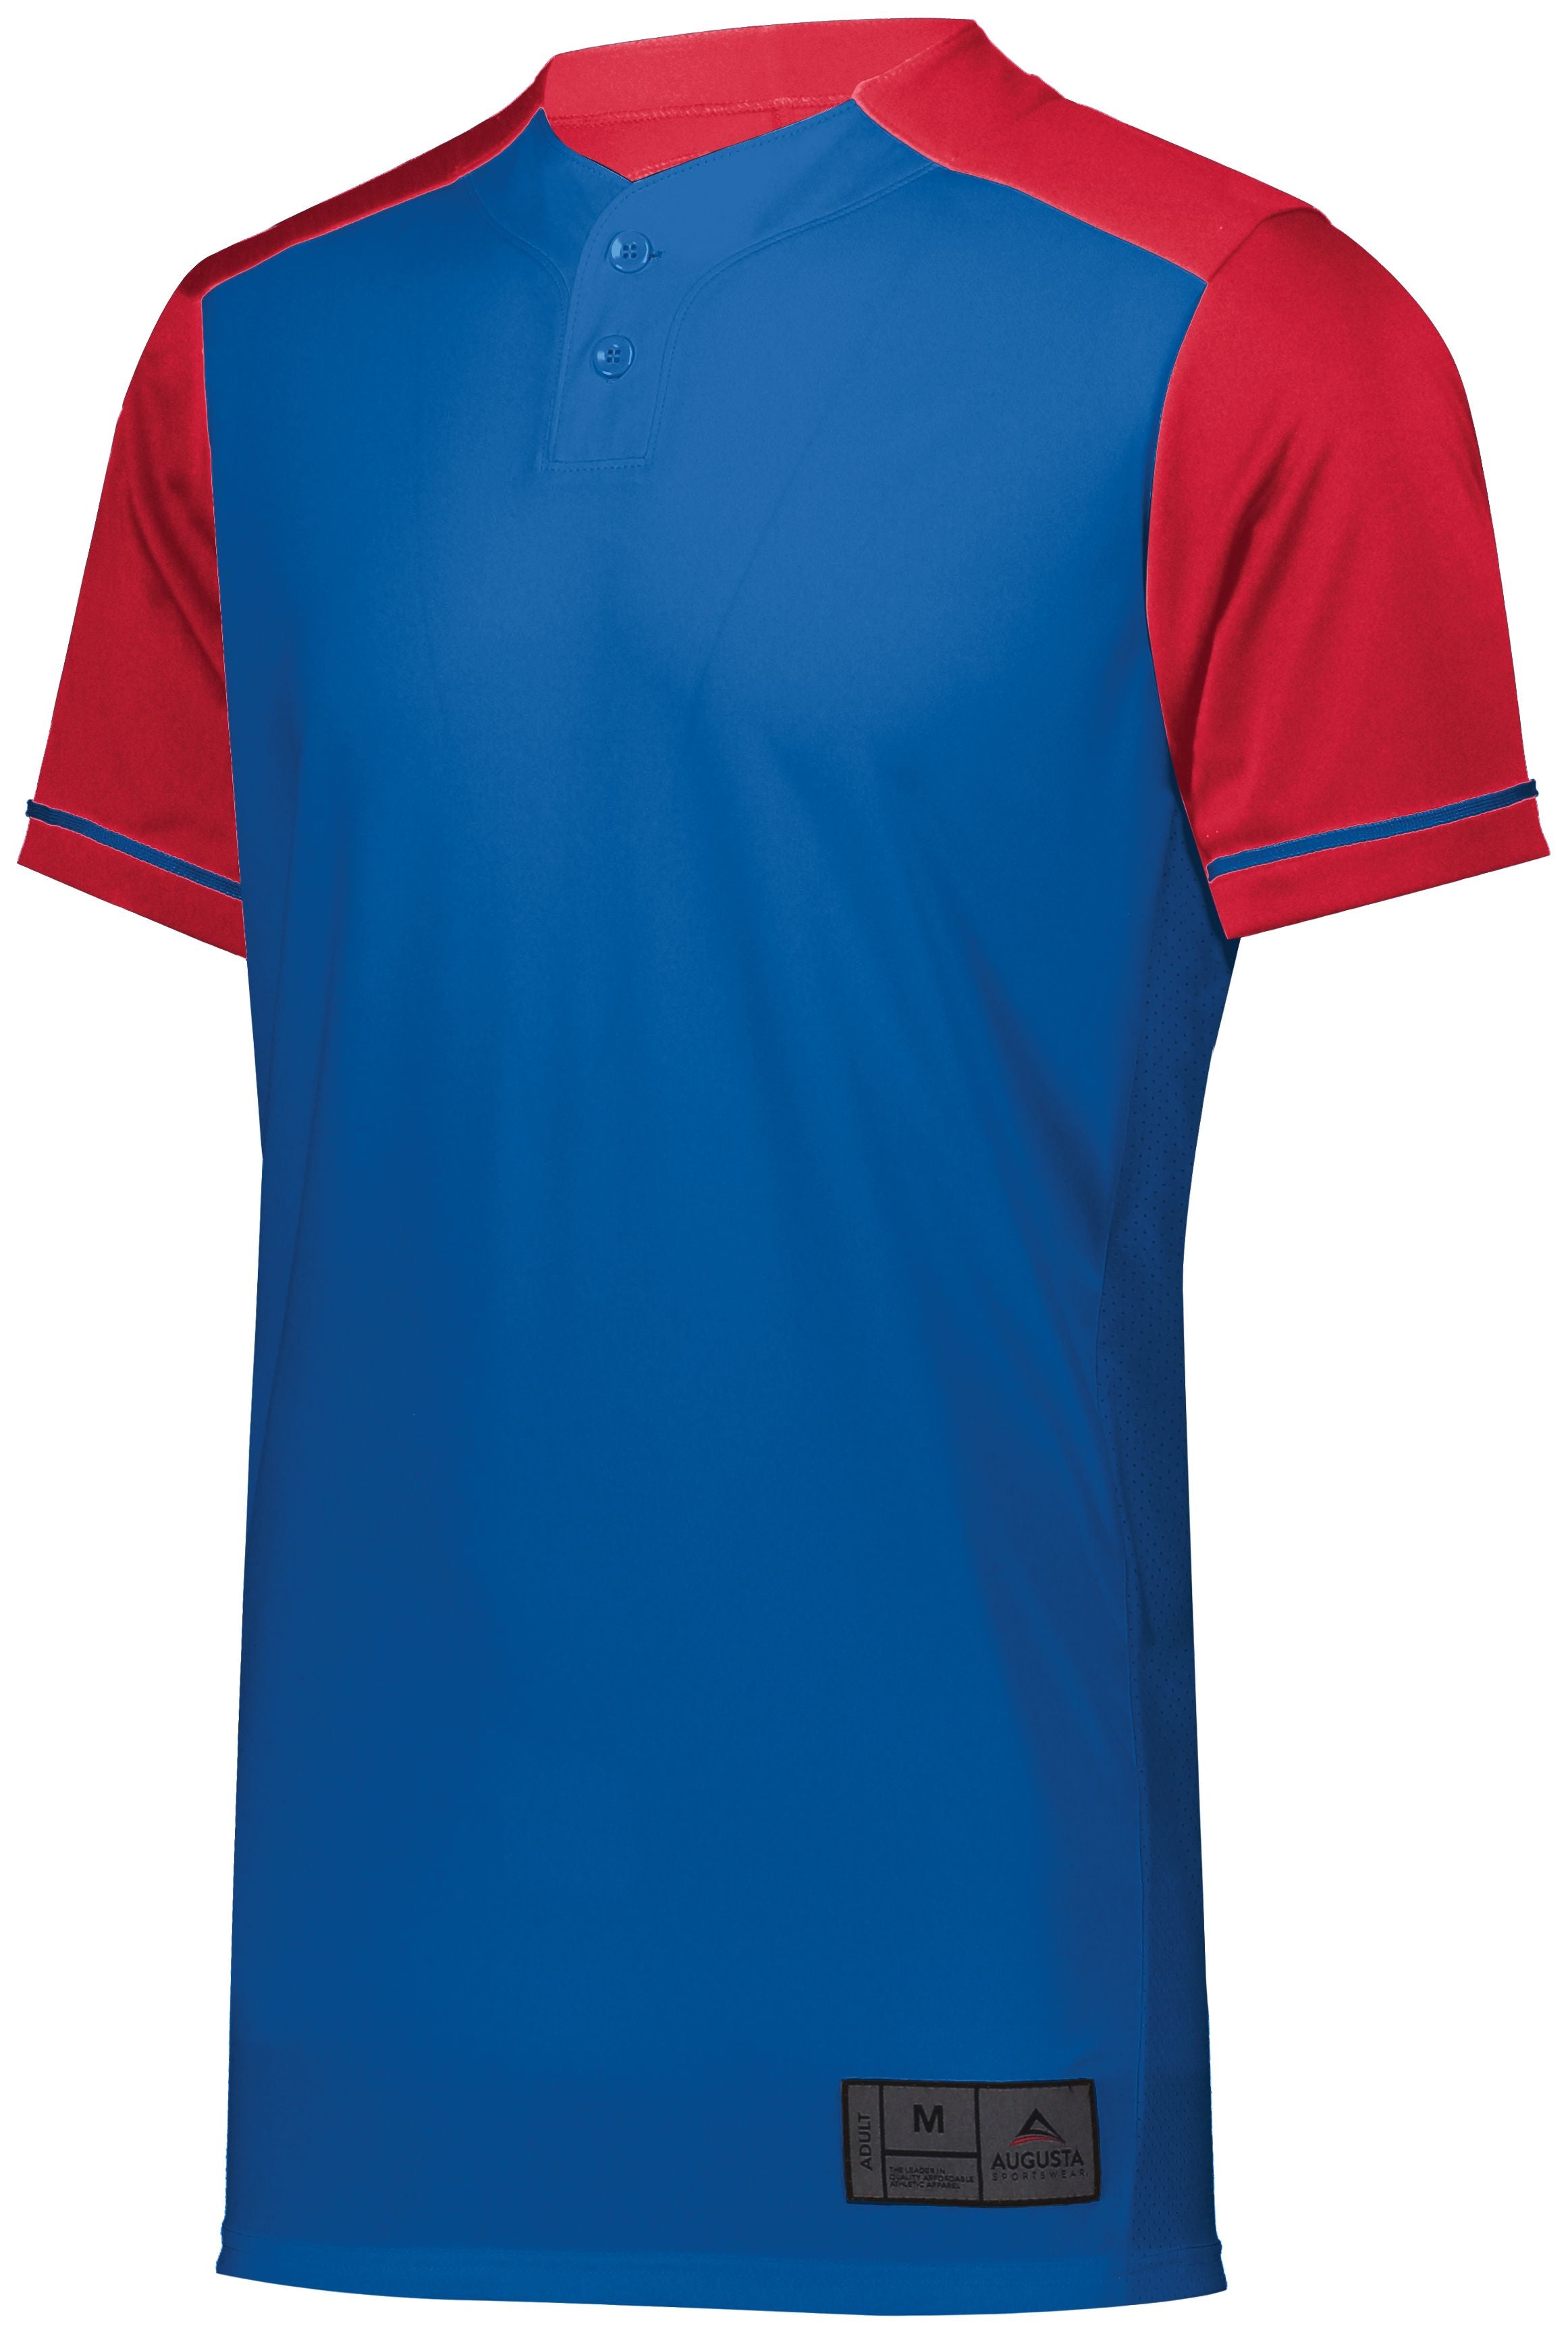 Augusta Sportswear Youth Closer Jersey in Royal/Scarlet  -Part of the Youth, Youth-Jersey, Augusta-Products, Baseball, Shirts, All-Sports, All-Sports-1 product lines at KanaleyCreations.com